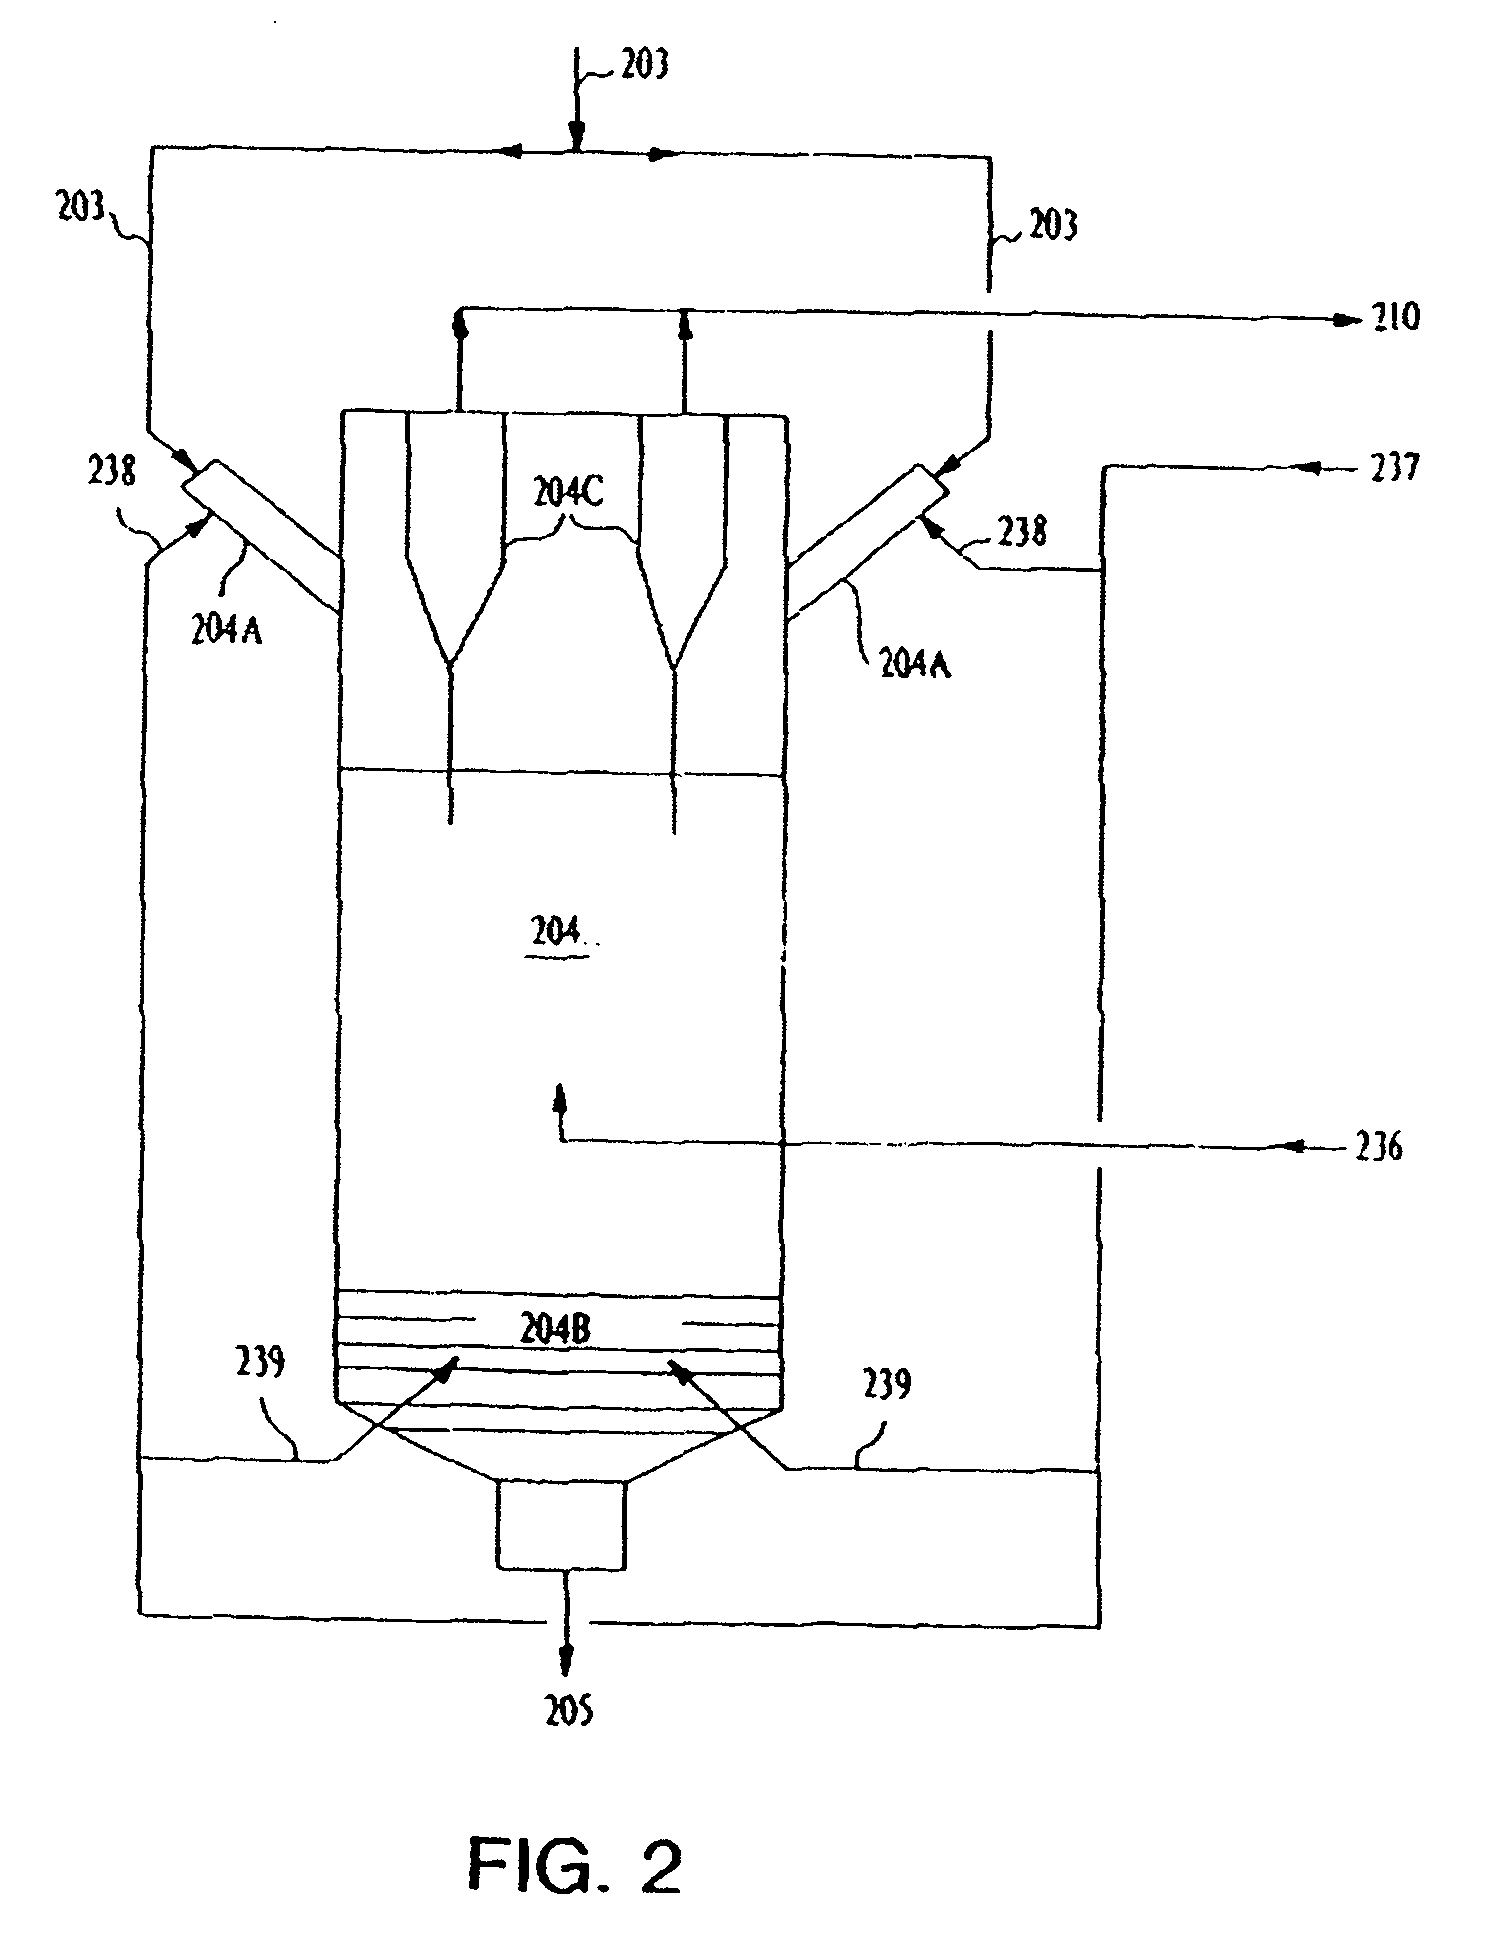 Process and apparatus for converting oil shale or oil sand (tar sand) to oil